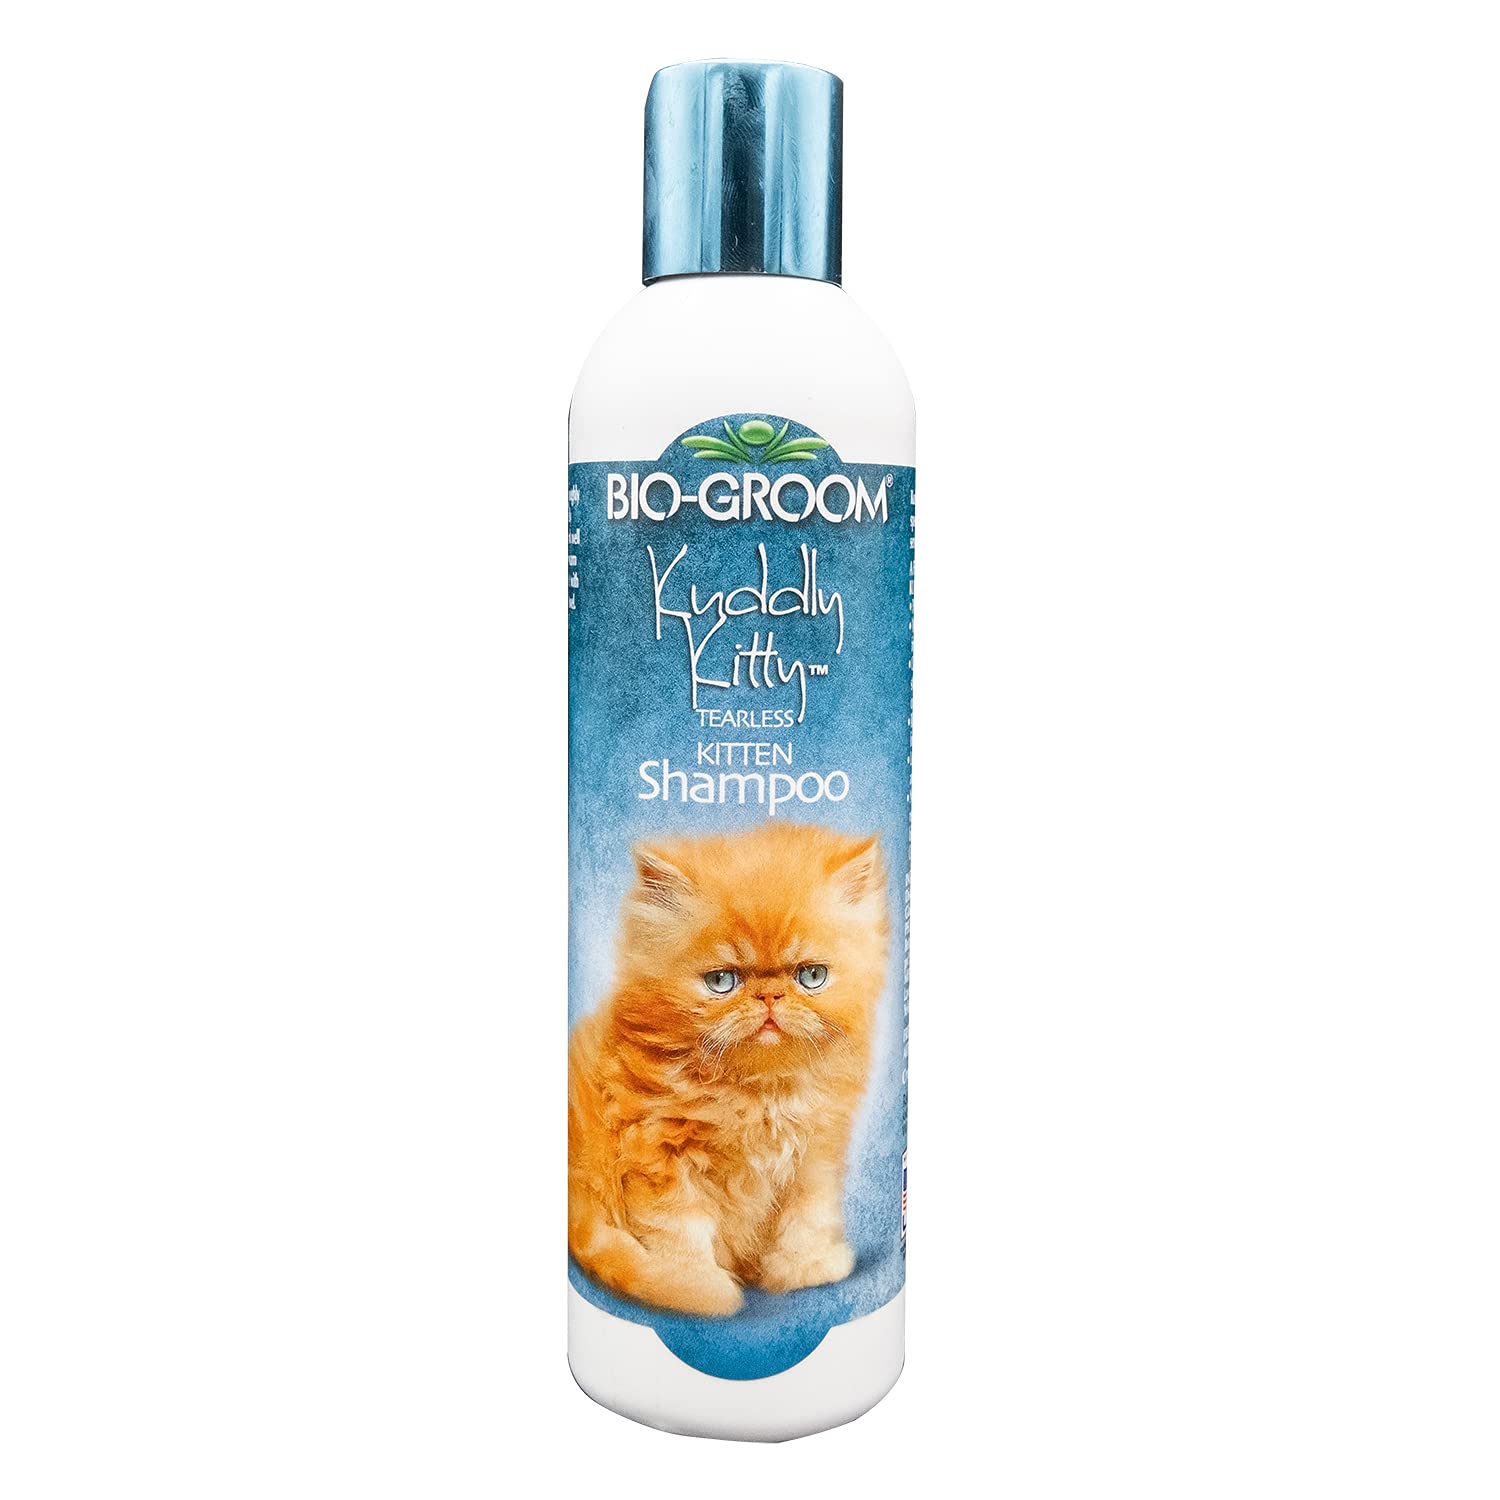 Bio-Groom Kuddly Kitty Tearless Kitten Shampoo for Cats, Replenish Cat Moisture and Maintain Coat Healthy, Silky, Shiny, Nourishes Skin and Keep Them Smelling Fresh, 236ml